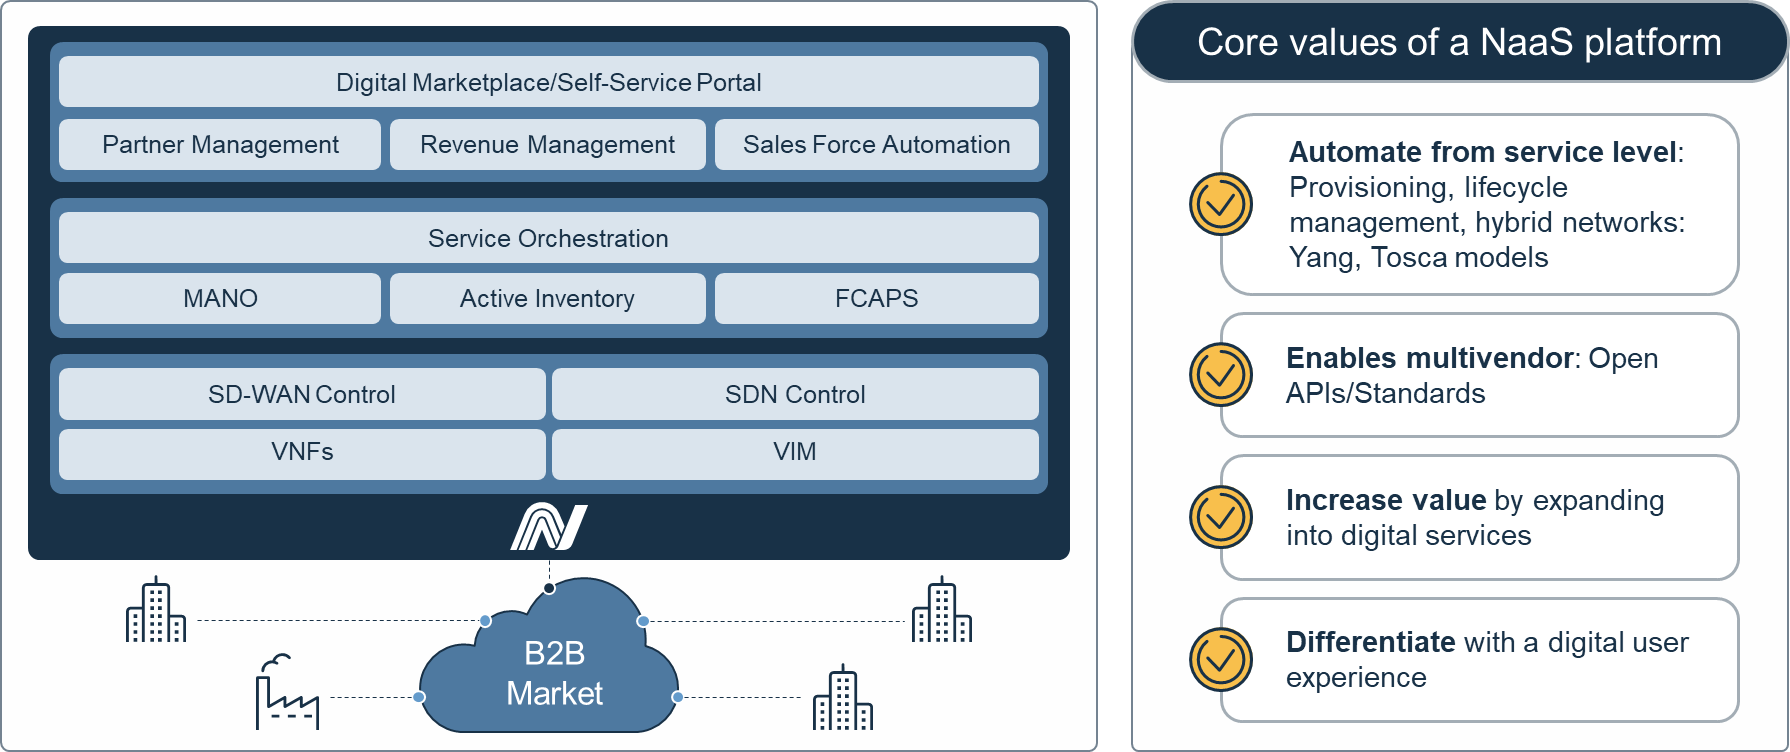 Network-as-a-Service Platform Architecture and Core Values